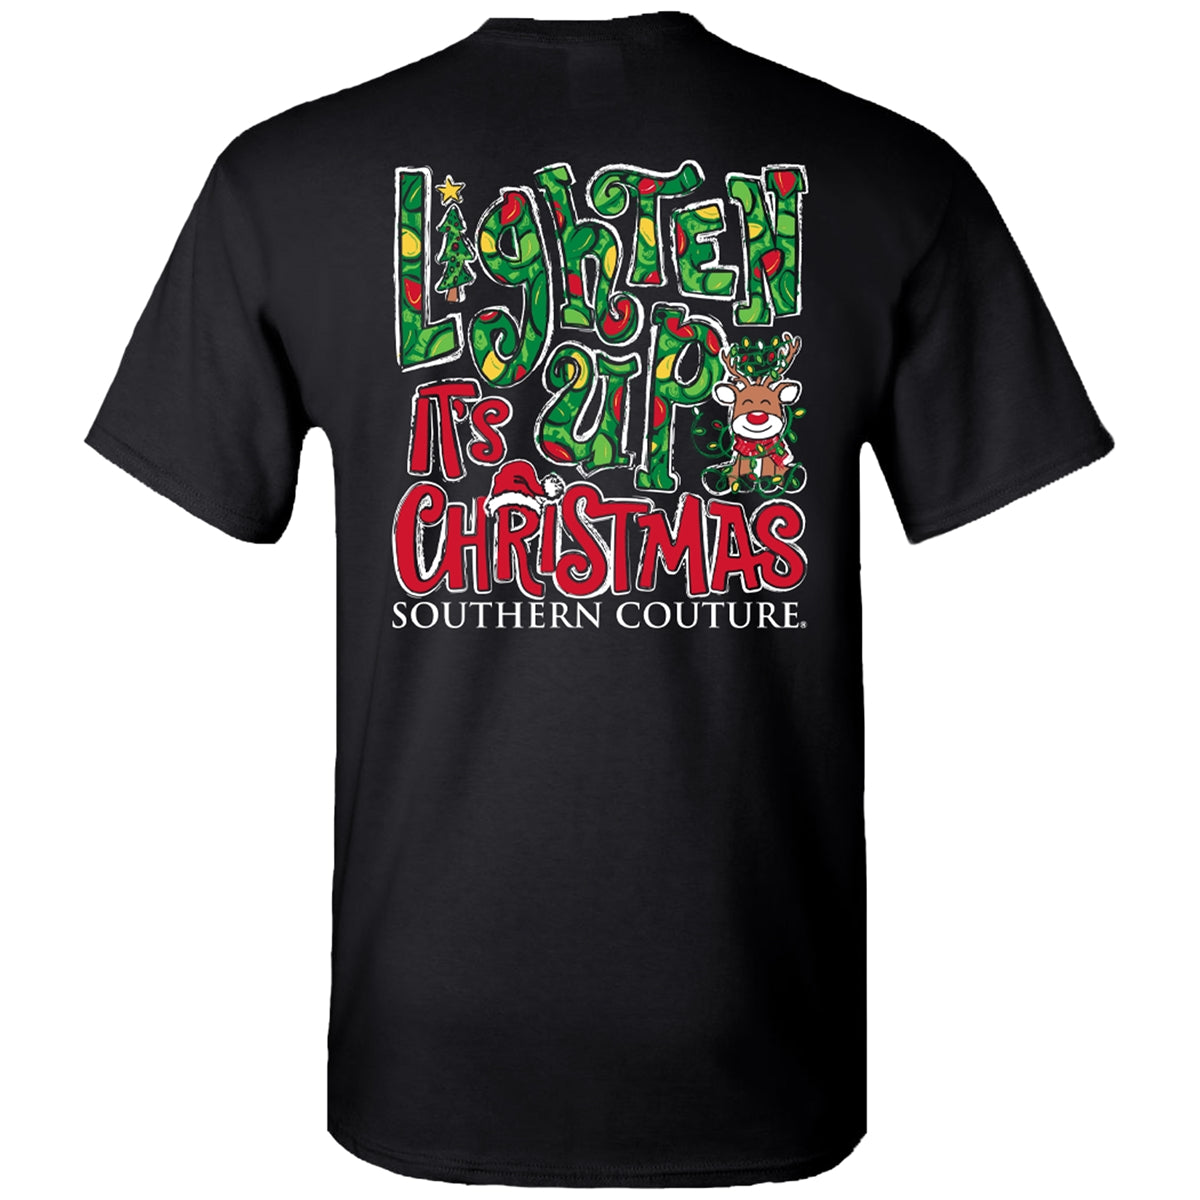 Southern Couture Lighten Up It's Christmas T-Shirt